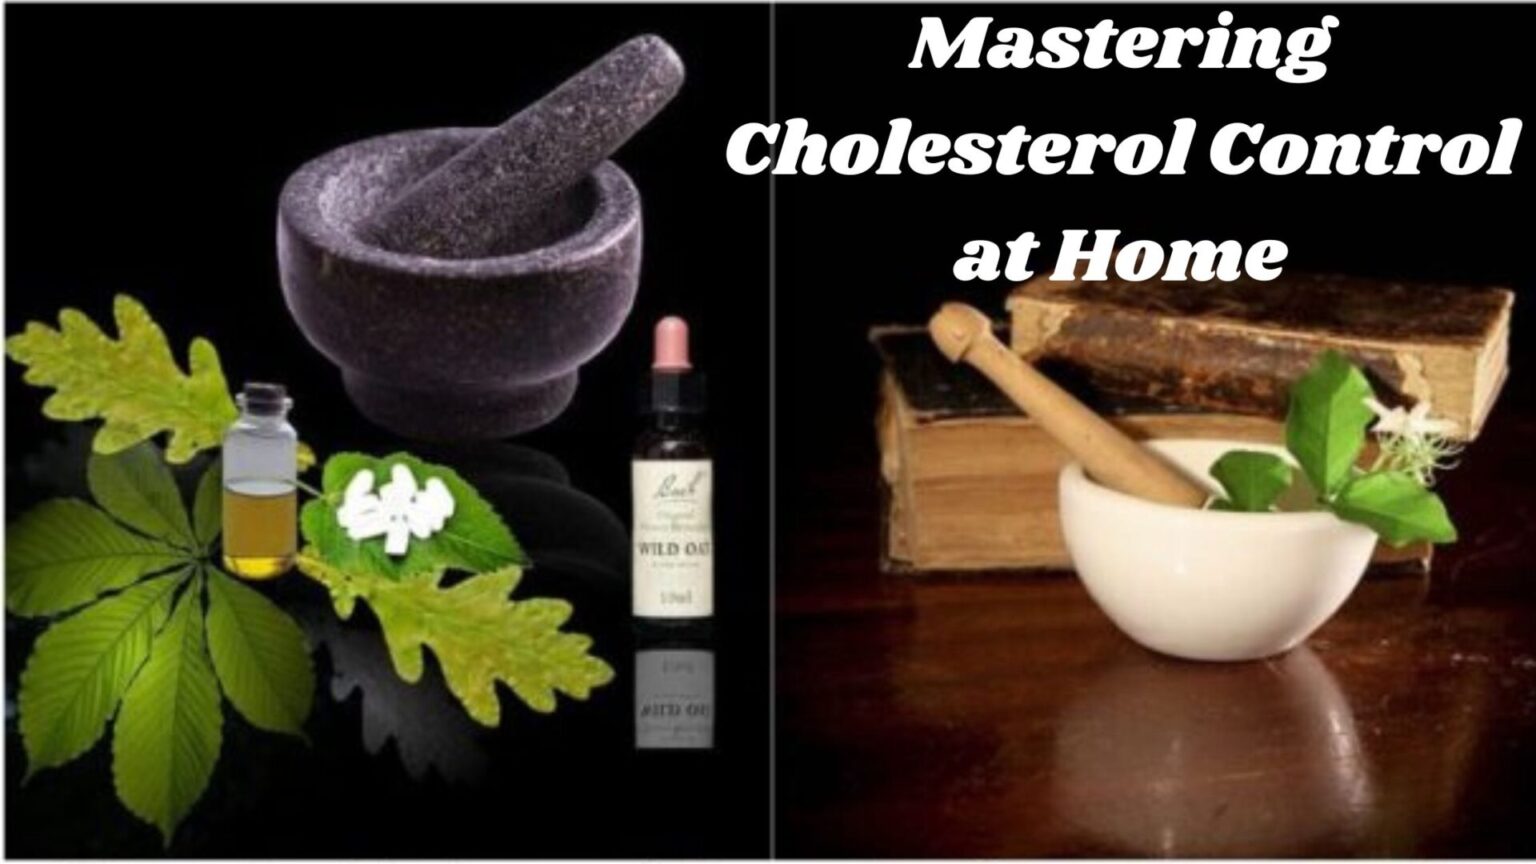 Mastering Cholesterol Control at Home: Trustworthy and Effective Natural Remedies